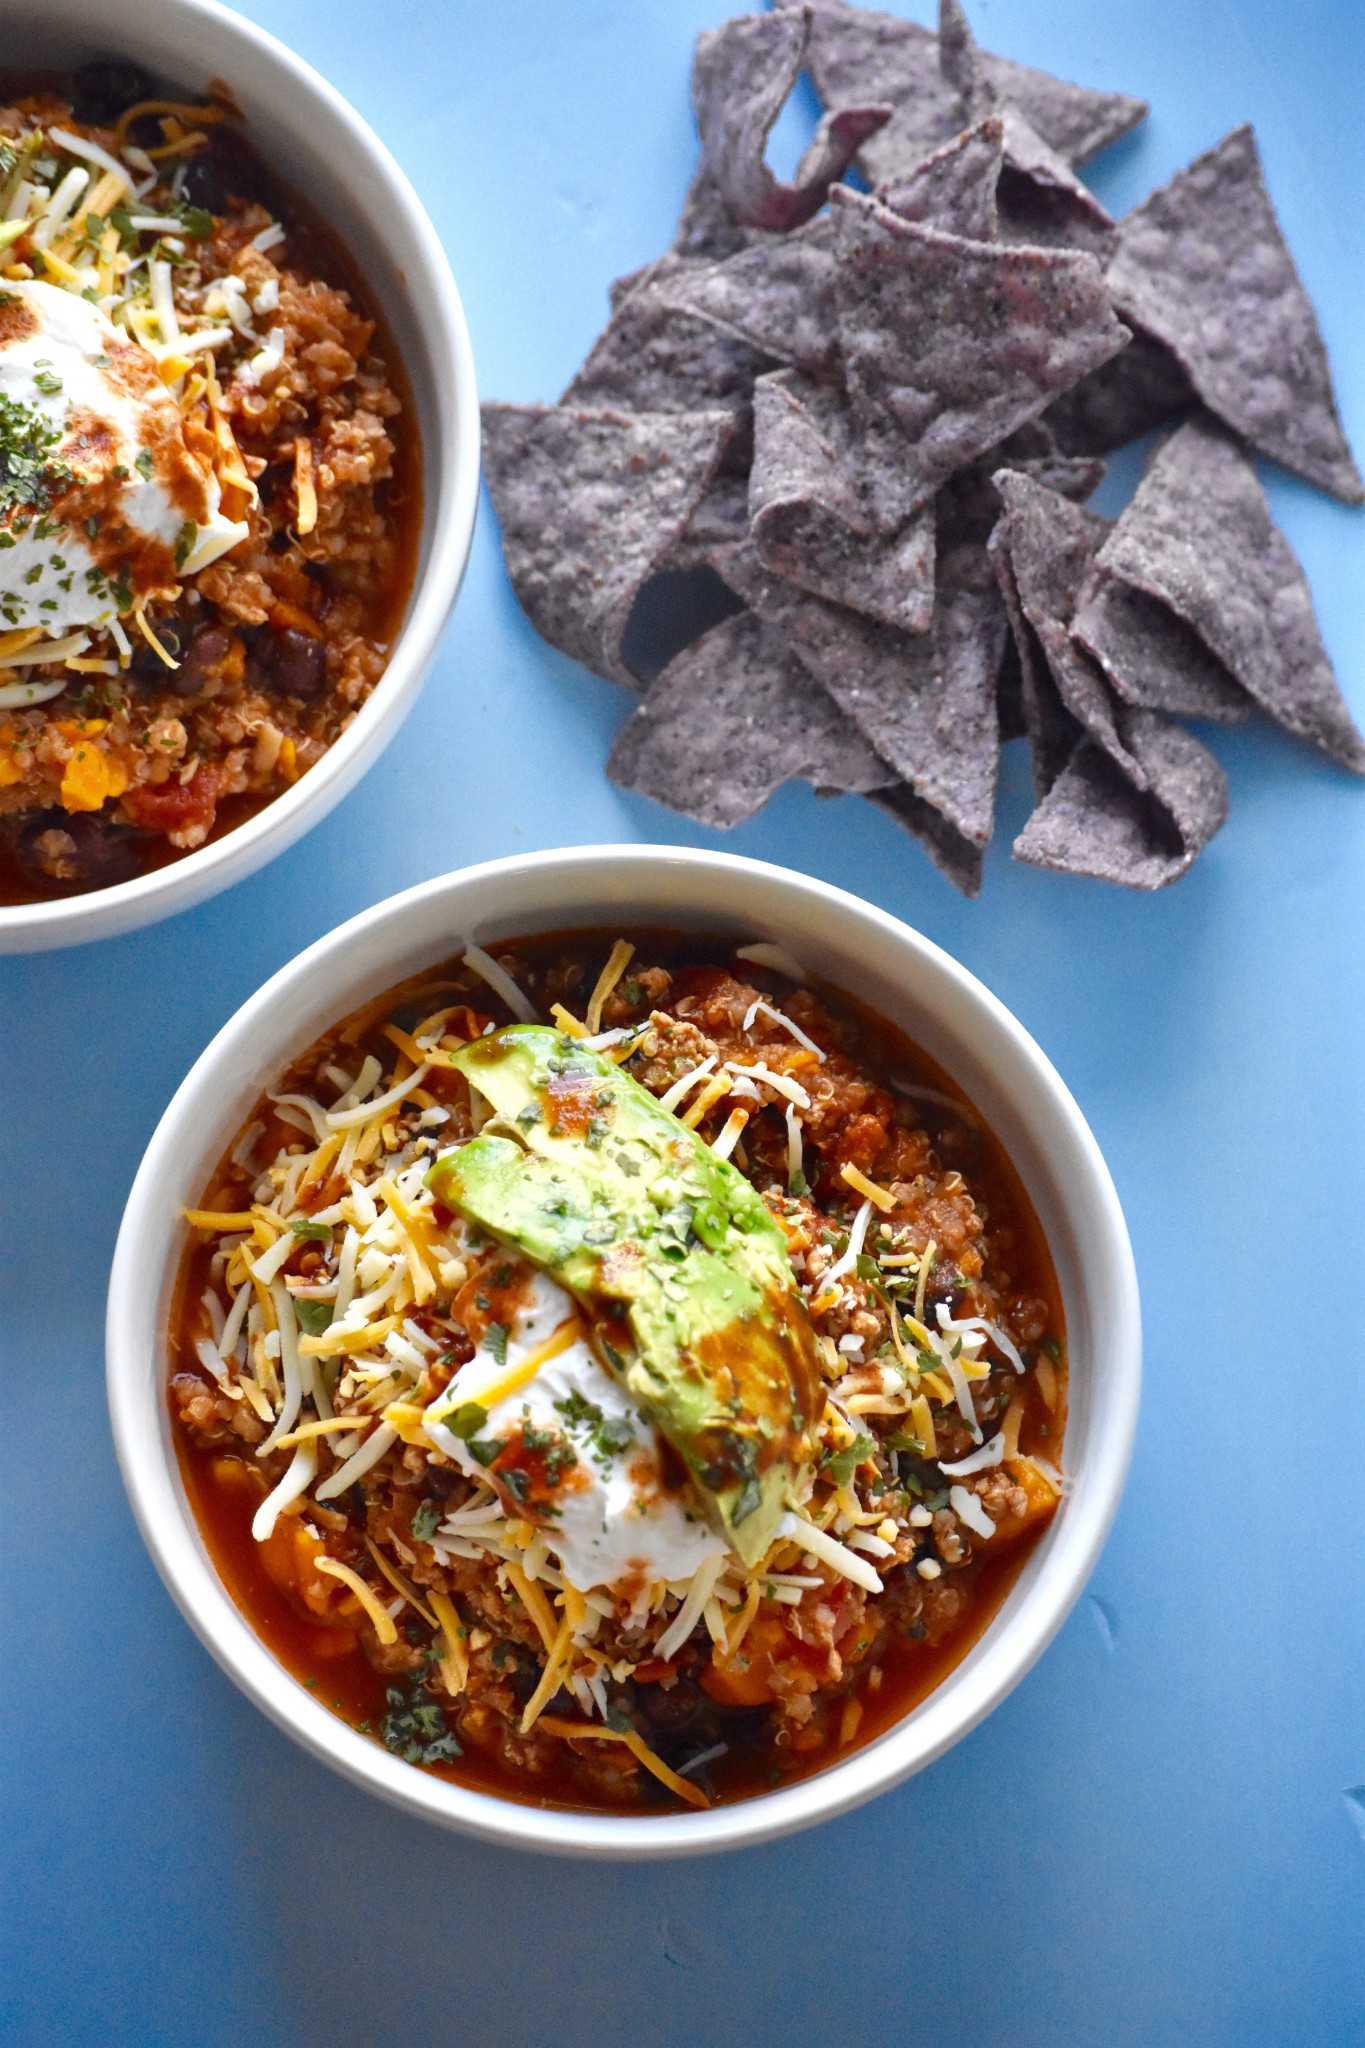 hearty black bean, sweet potato, quinoa and turkey chili - the perfect comforting dish for these chilly days! // cait's plate